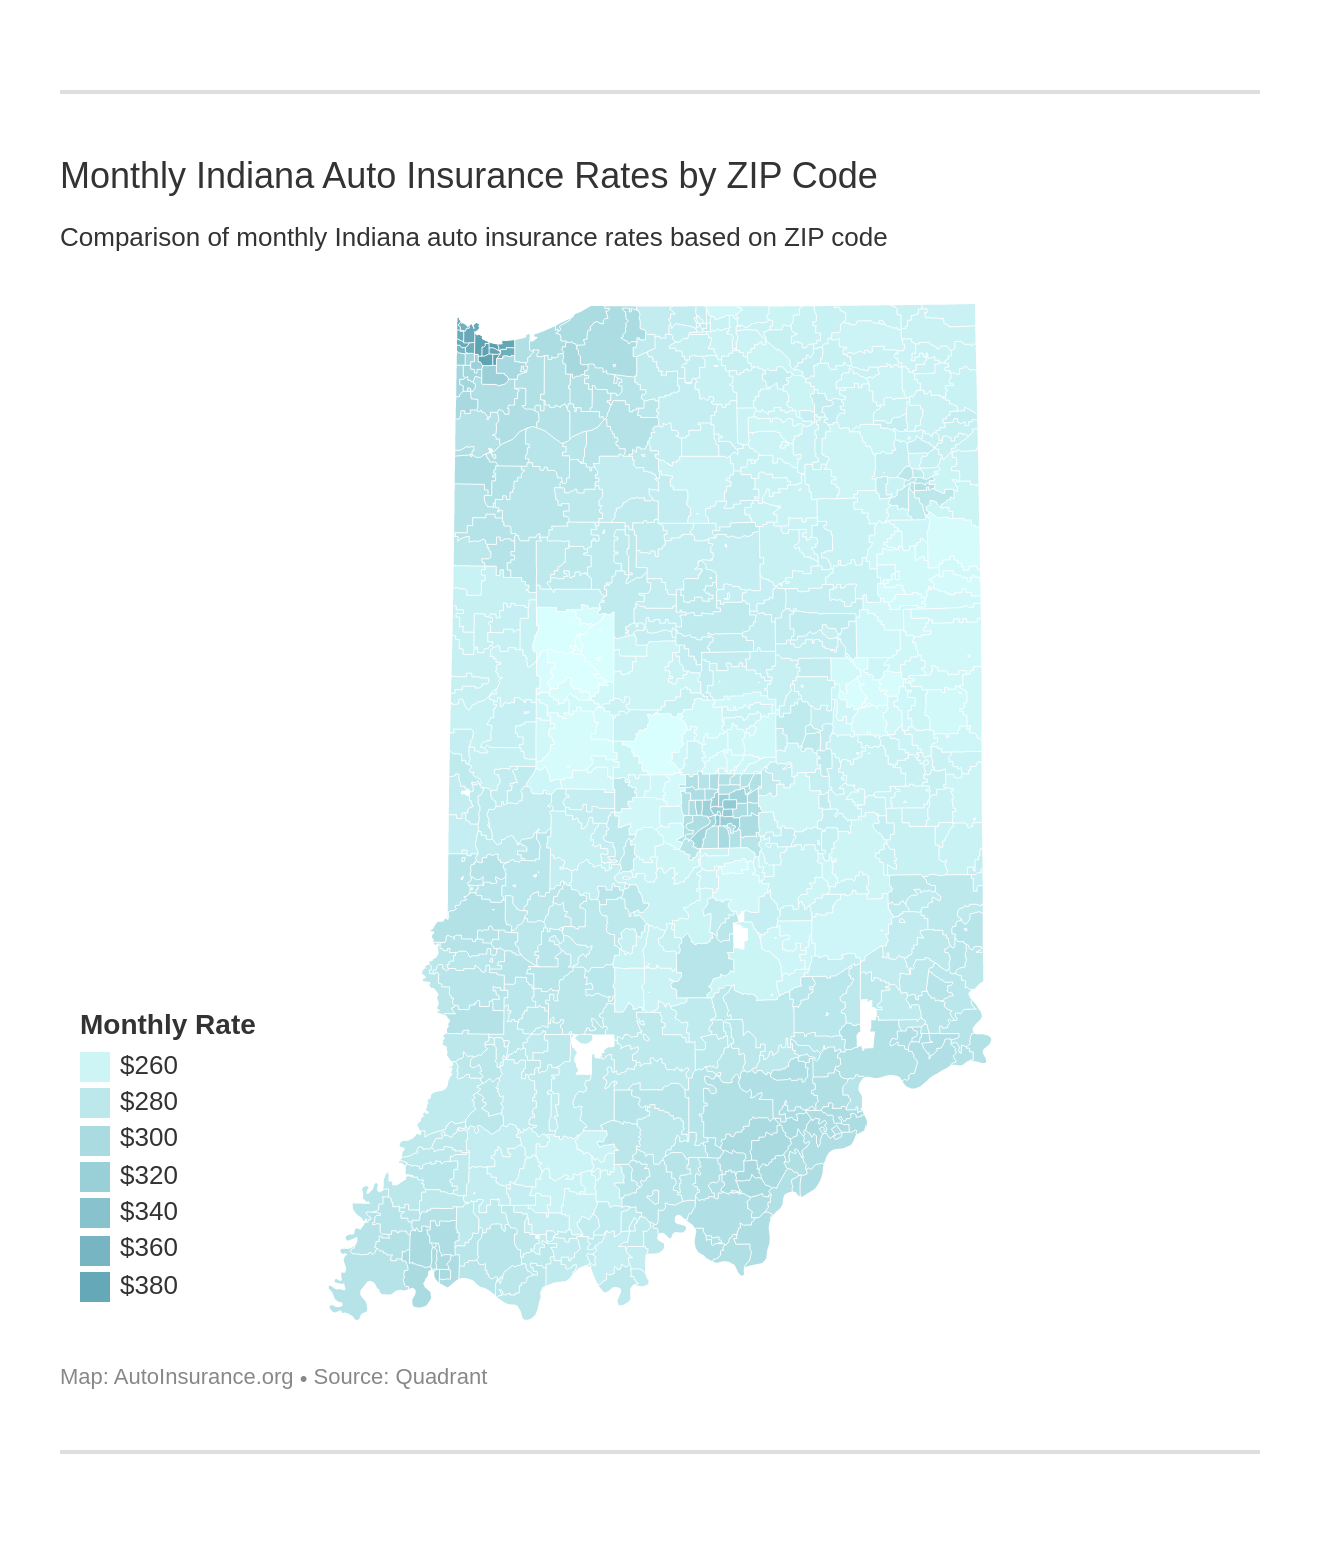 Monthly Indiana Auto Insurance Rates by ZIP Code